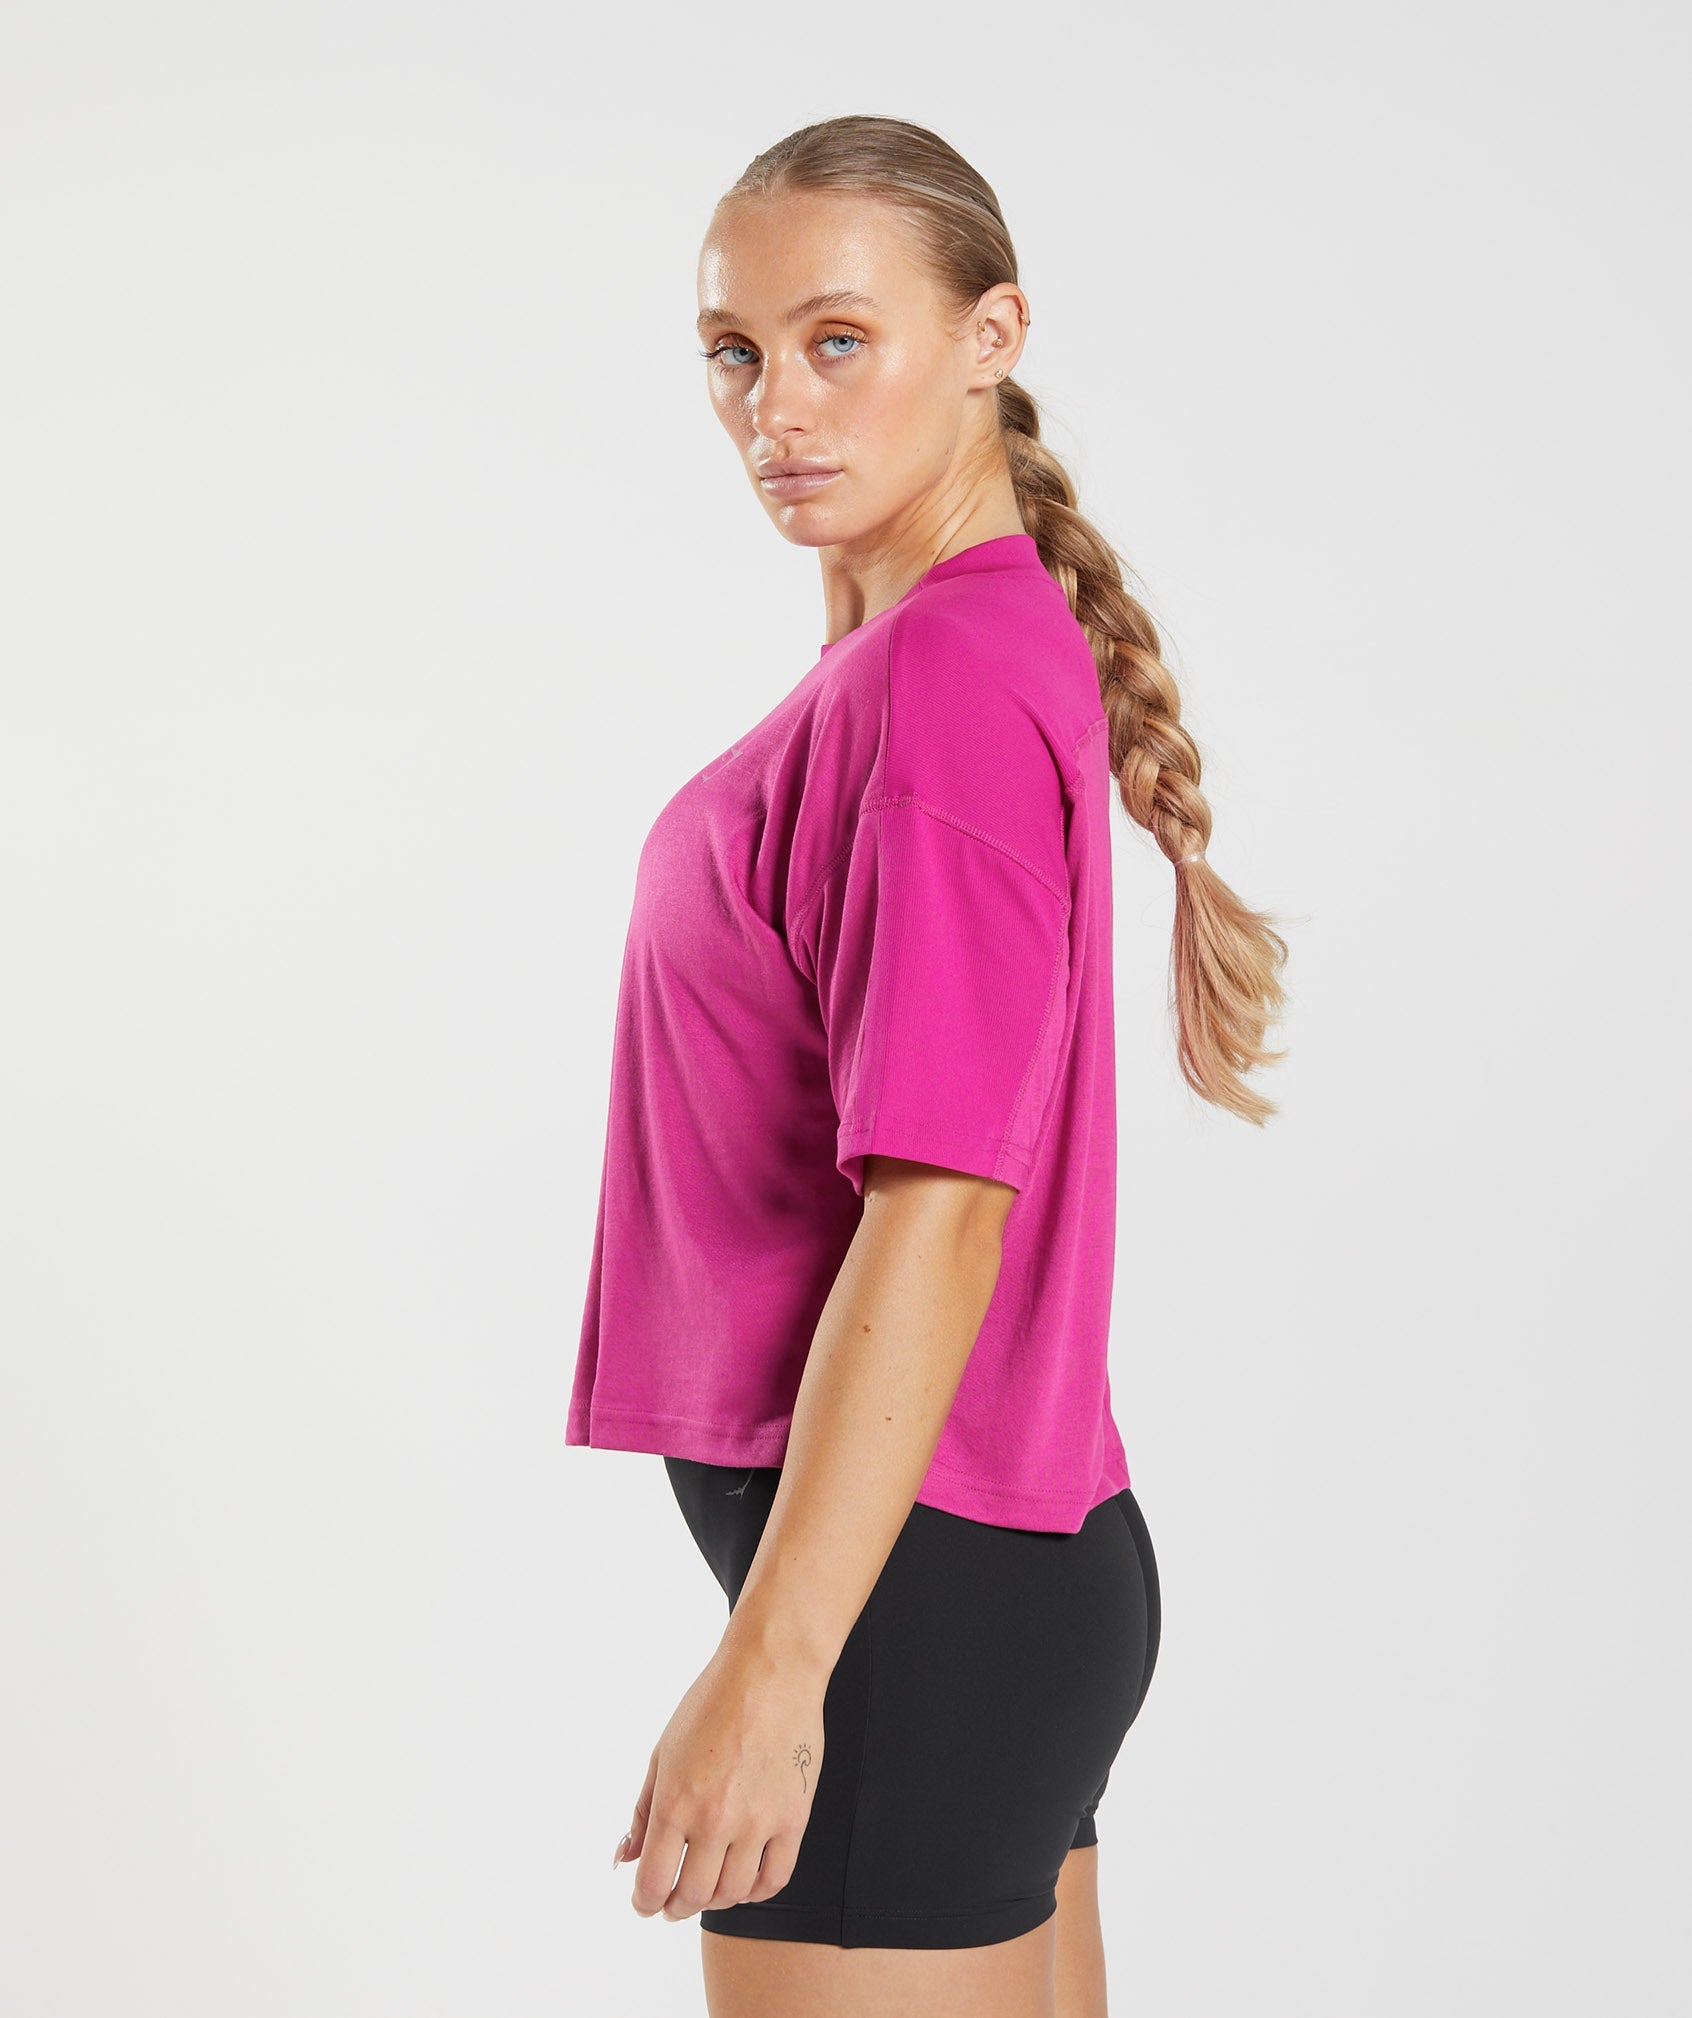 GS Power Midi Top in Magenta Pink - view 3